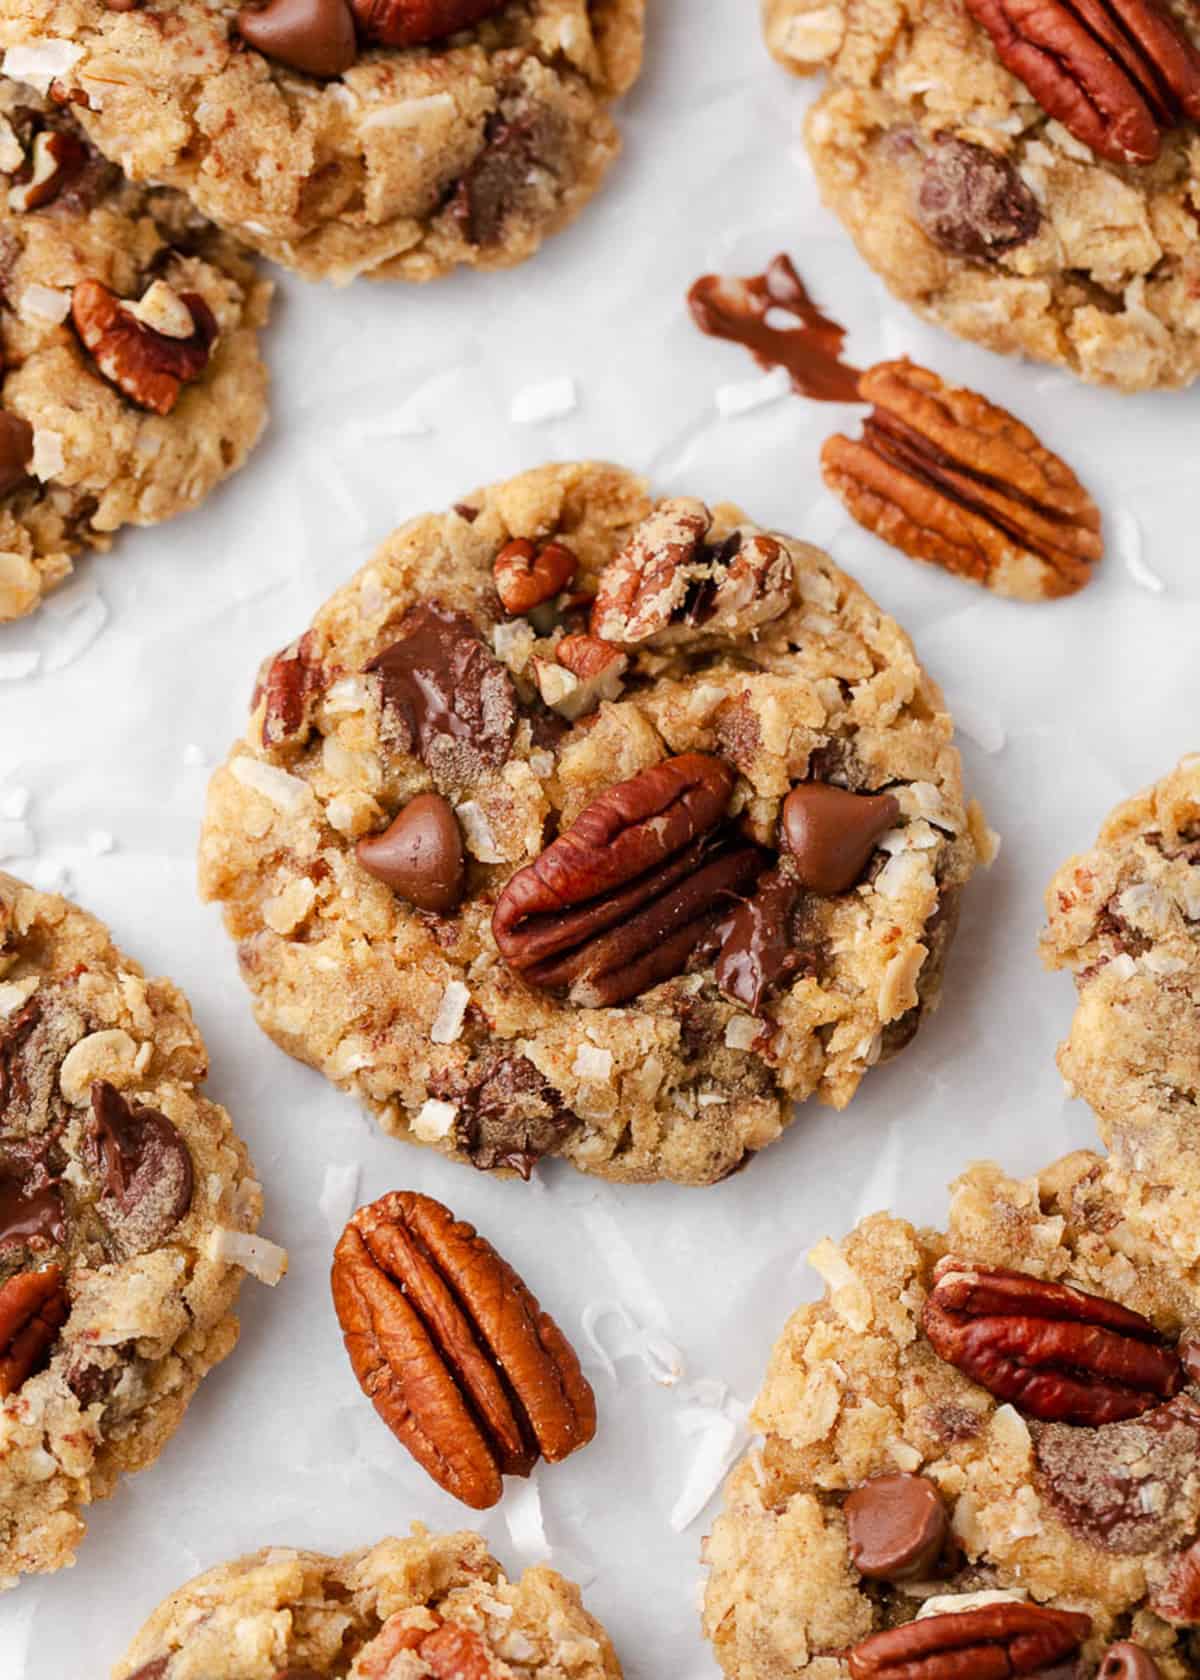 Cowboy cookies and pecans on counter.